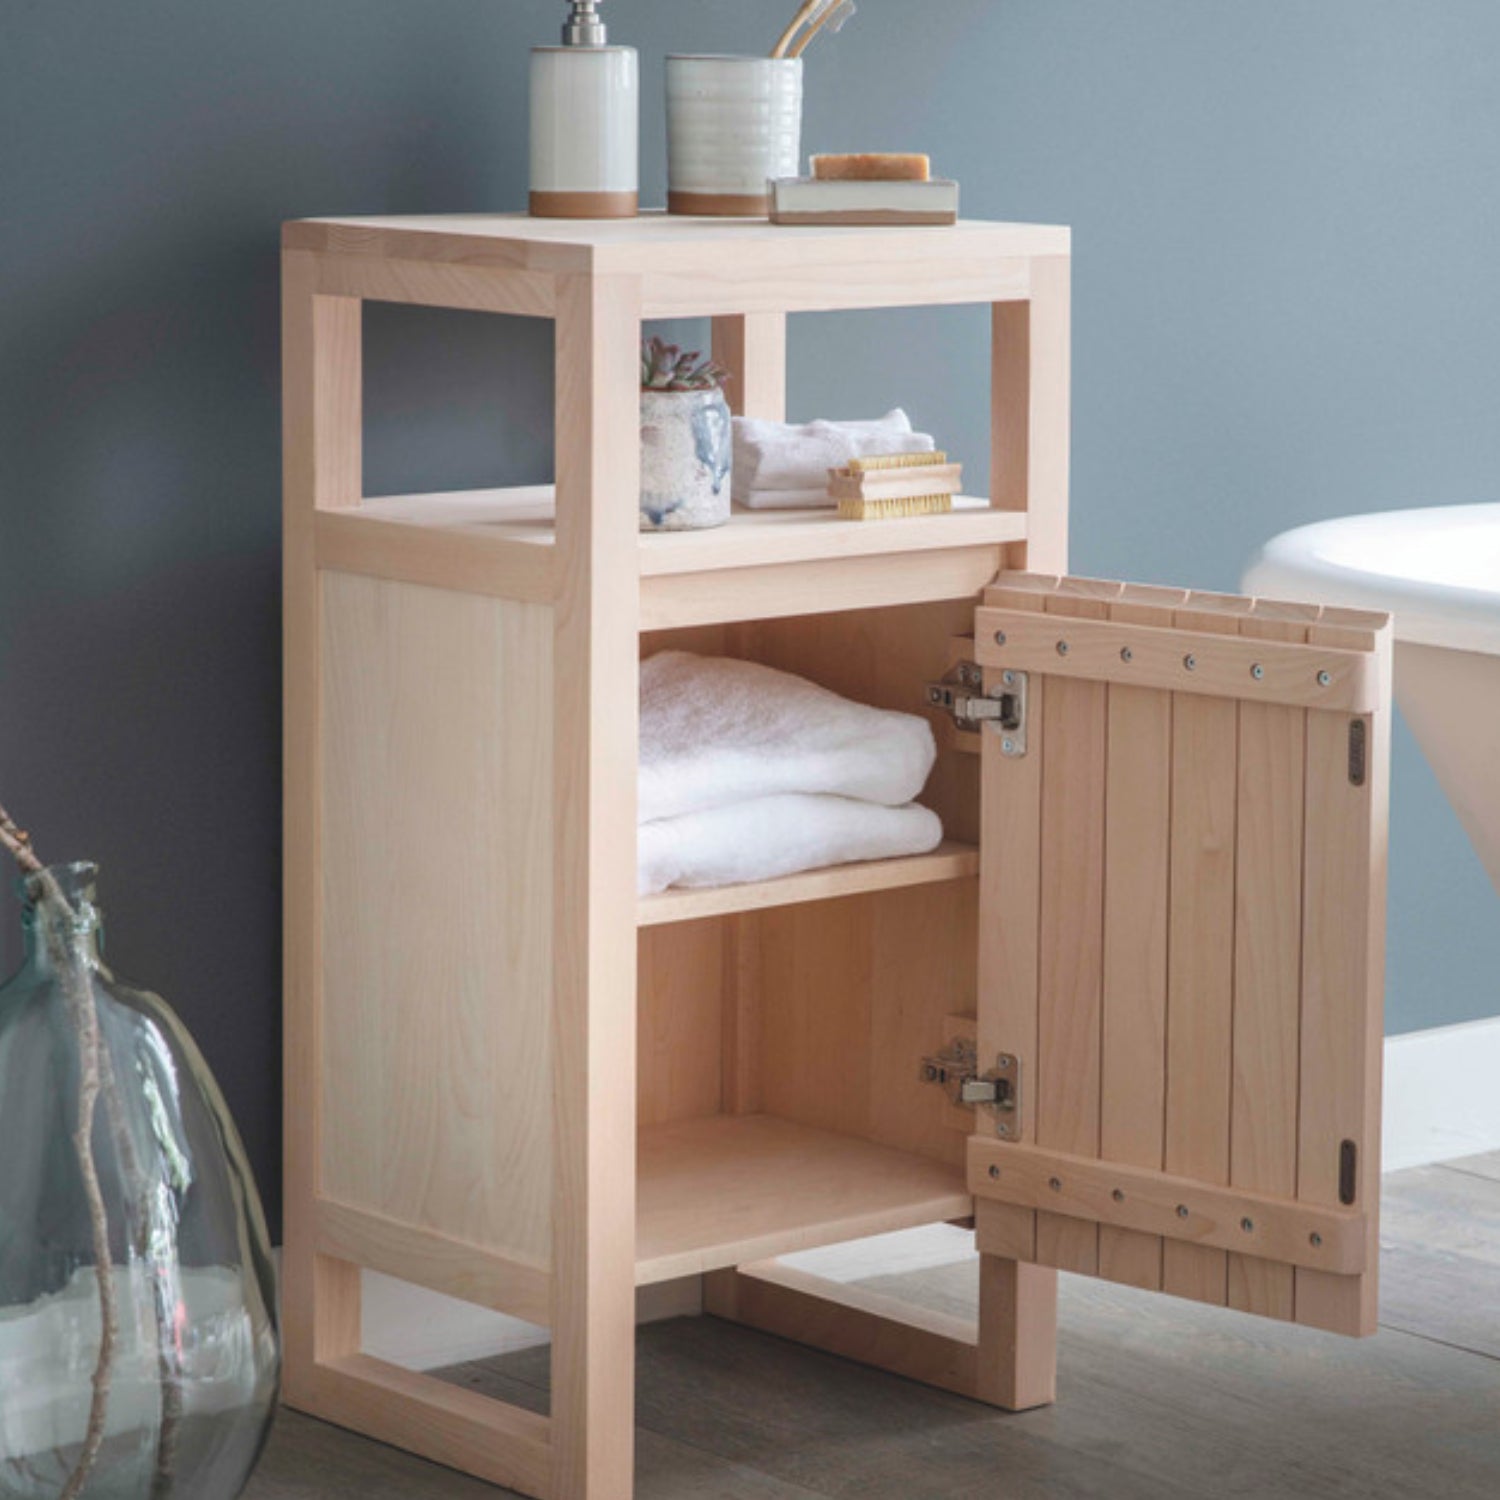 Southbourne Floor Standing Single Cabinet by Garden Trading - Beech